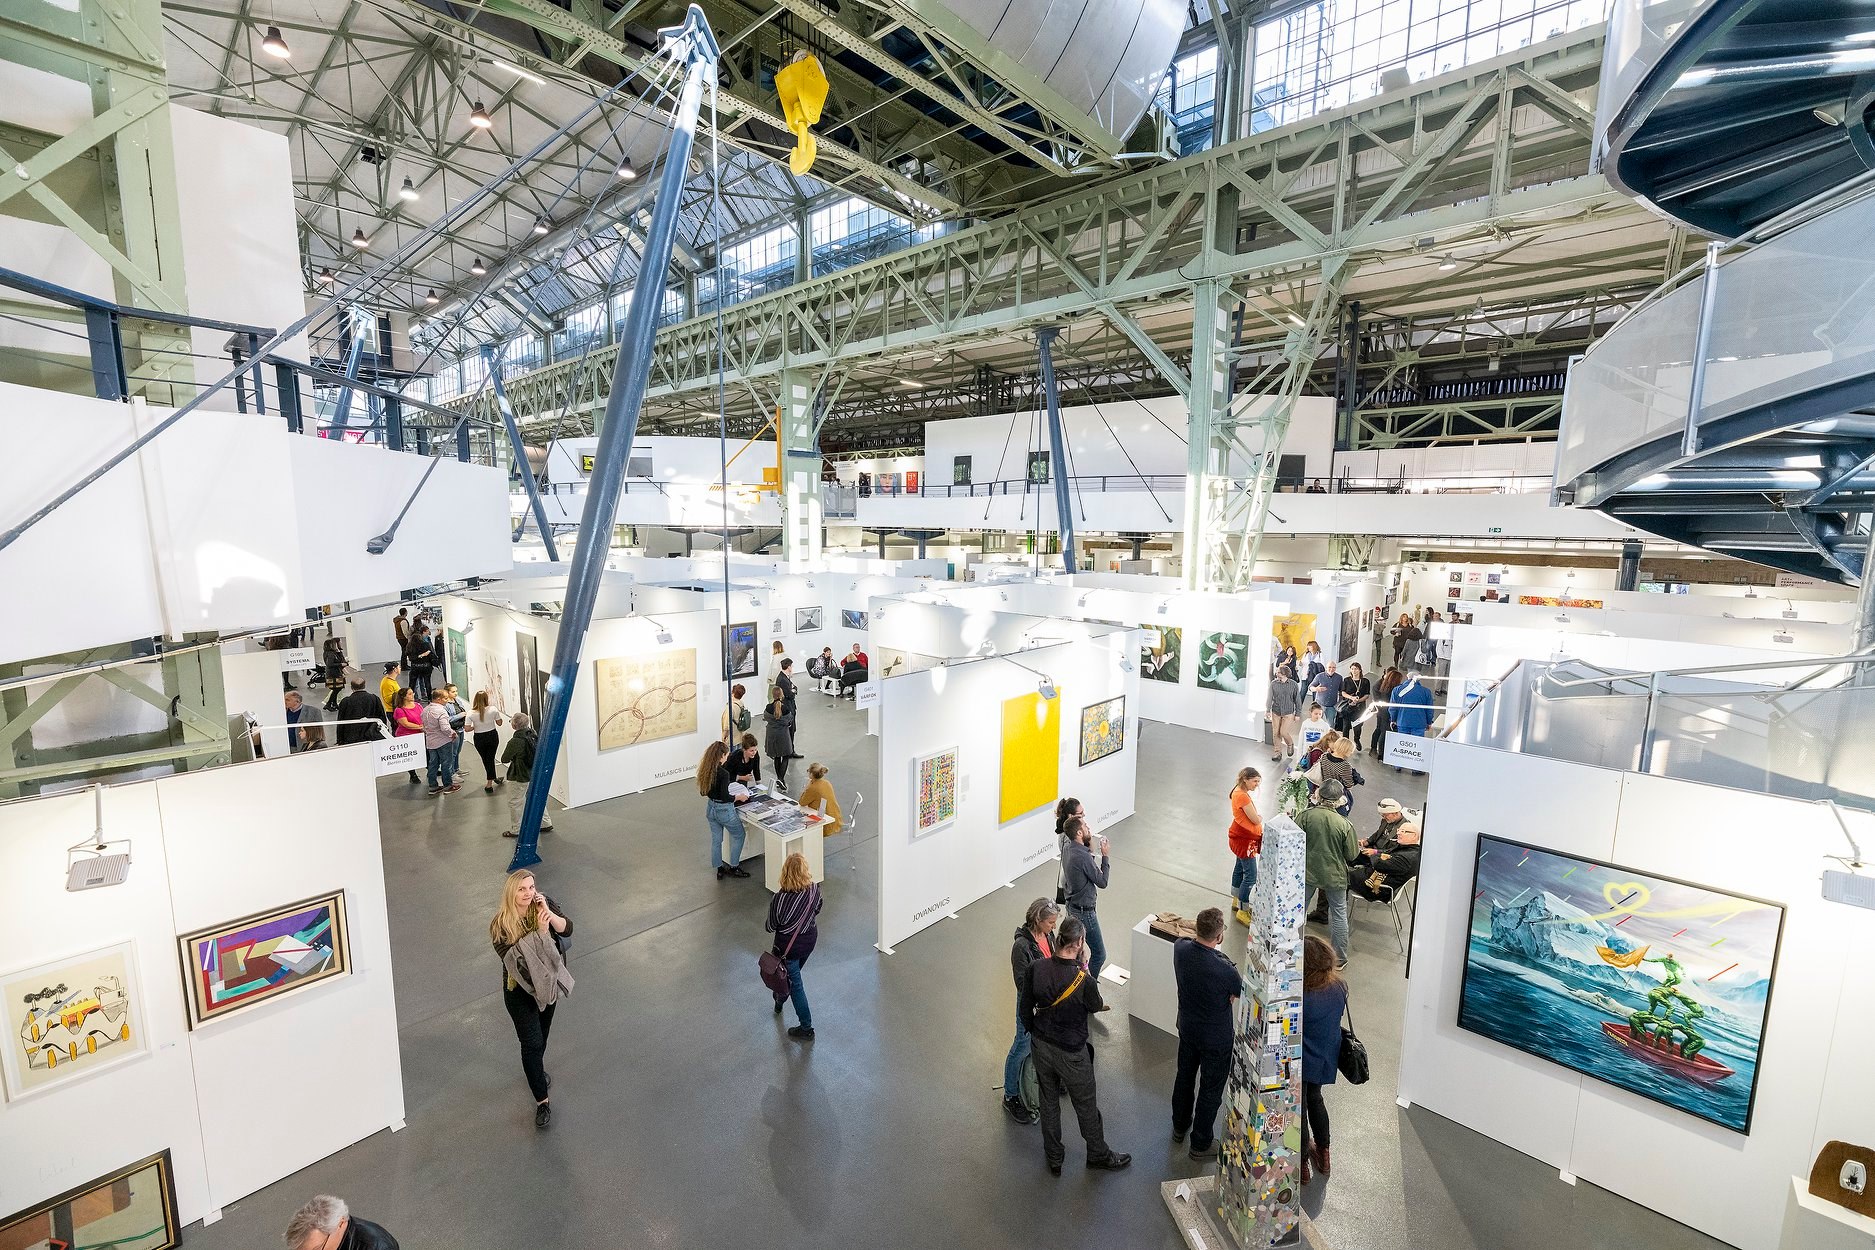 Art Market Budapest to Be Held between Oct 22-25 - Hungary Today